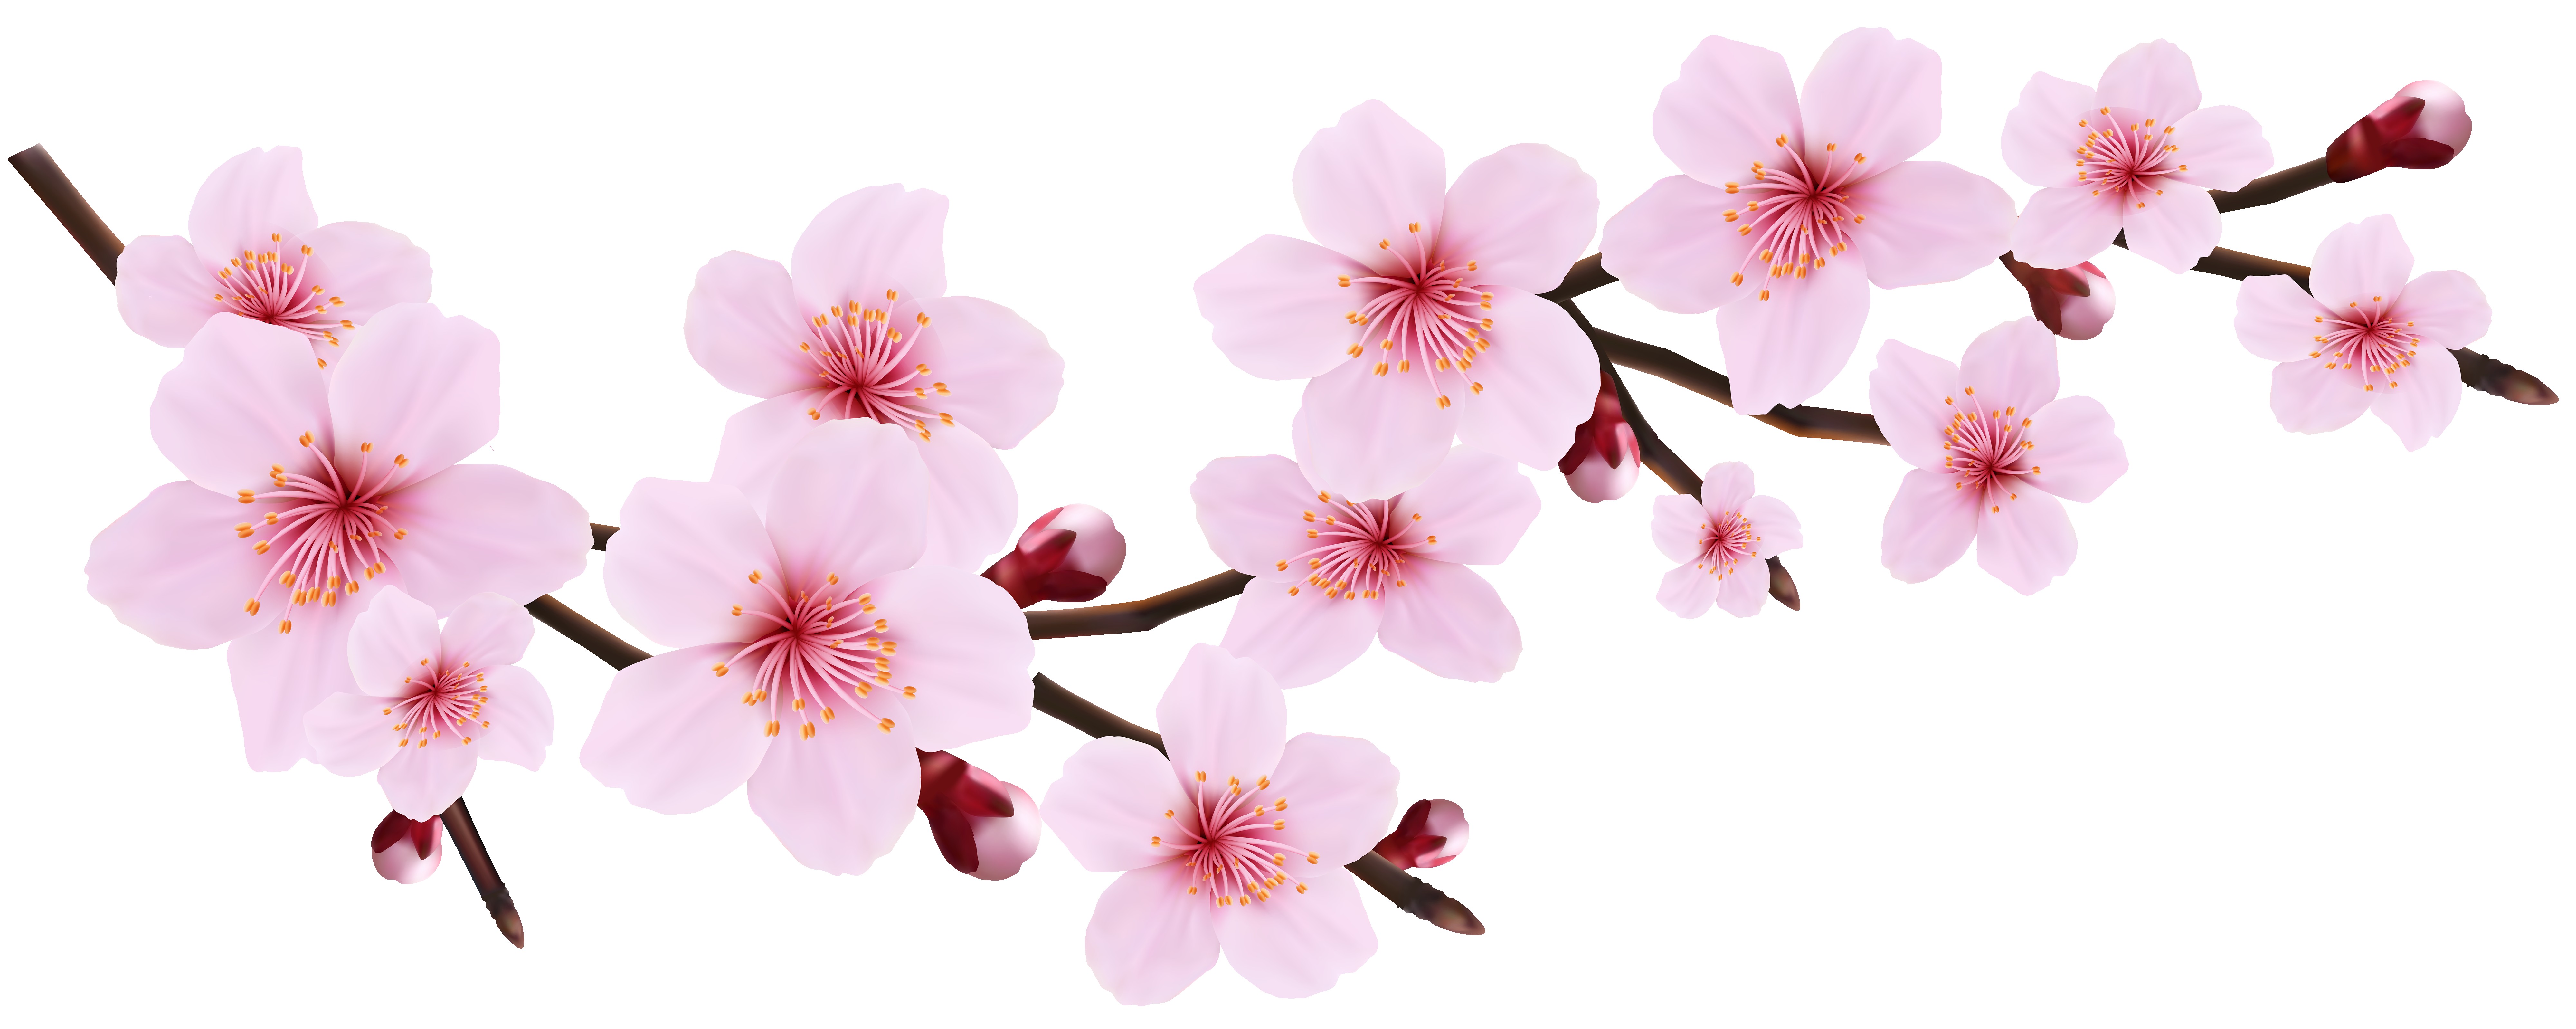 Cherry Tree Clipart at GetDrawings.com.